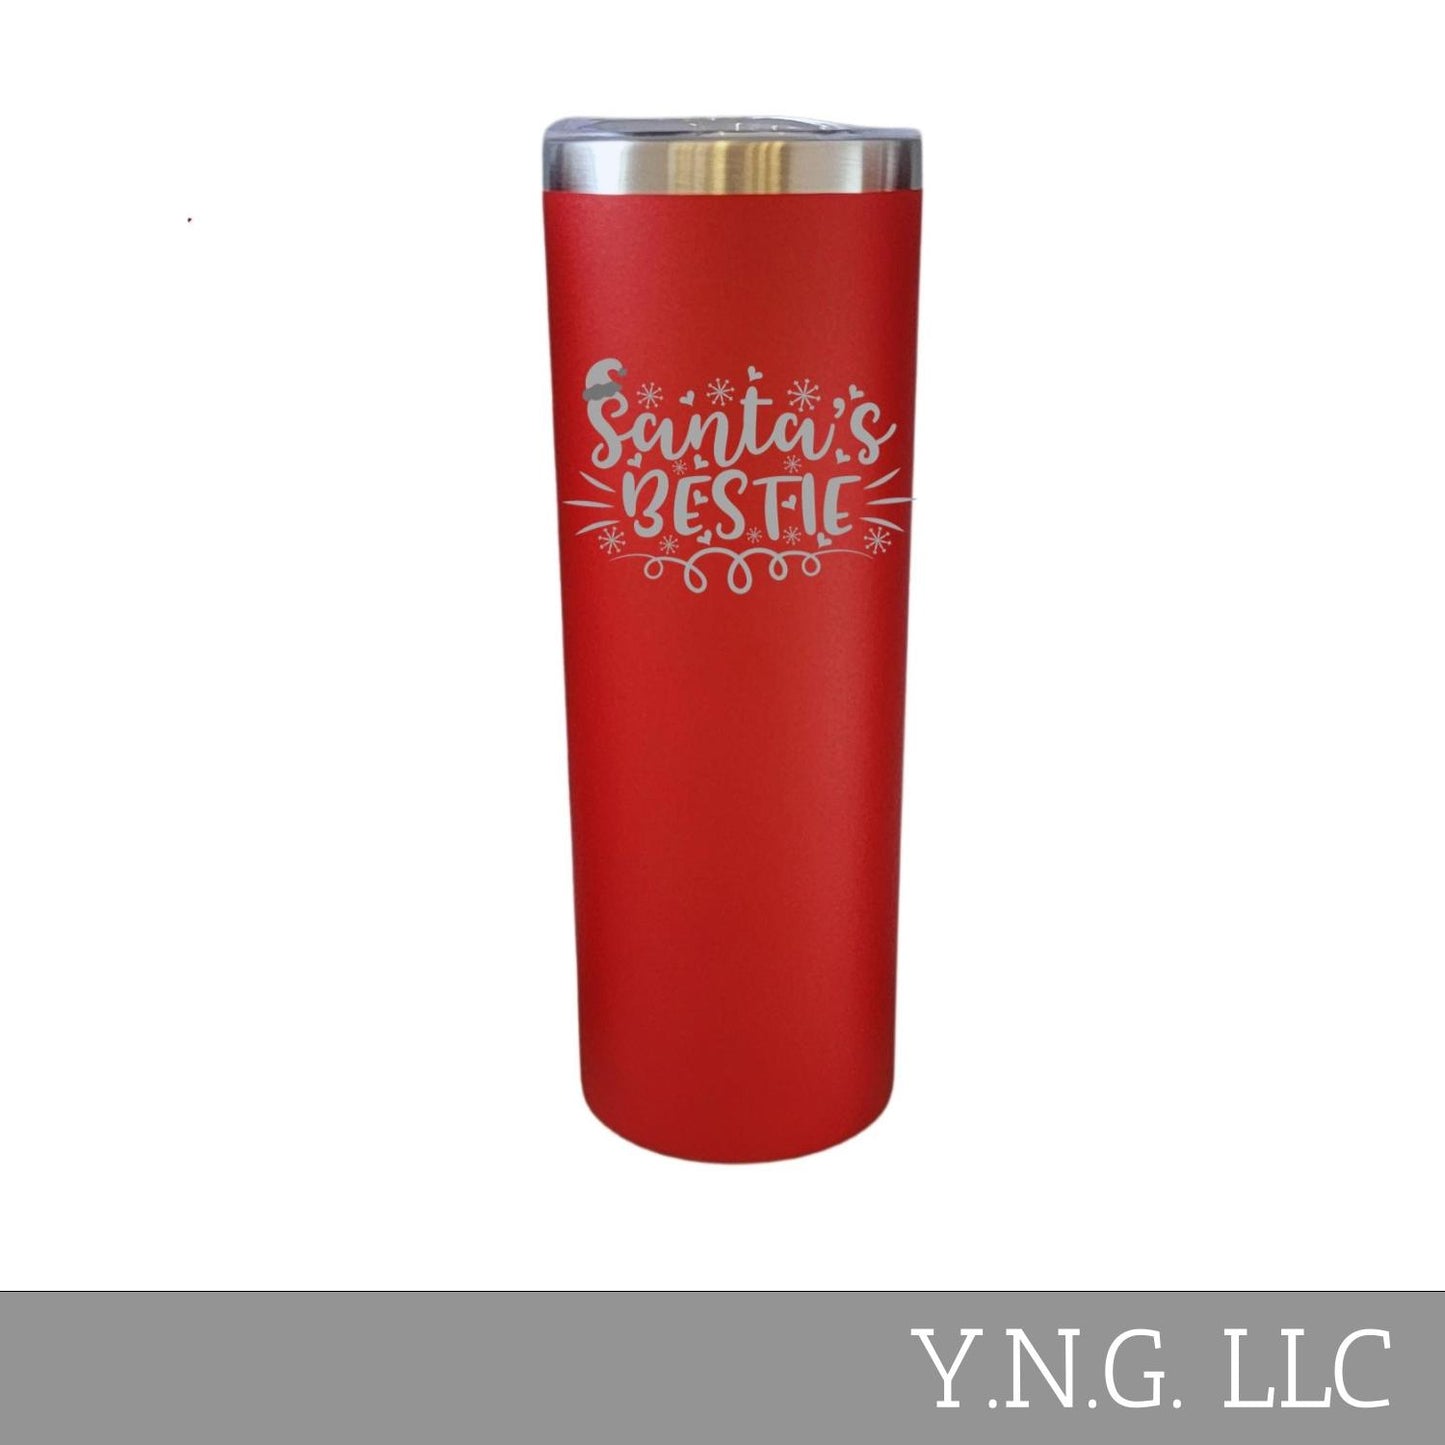 Insulated Skinny Tumbler, New Reindeer Names, Patty Bzz